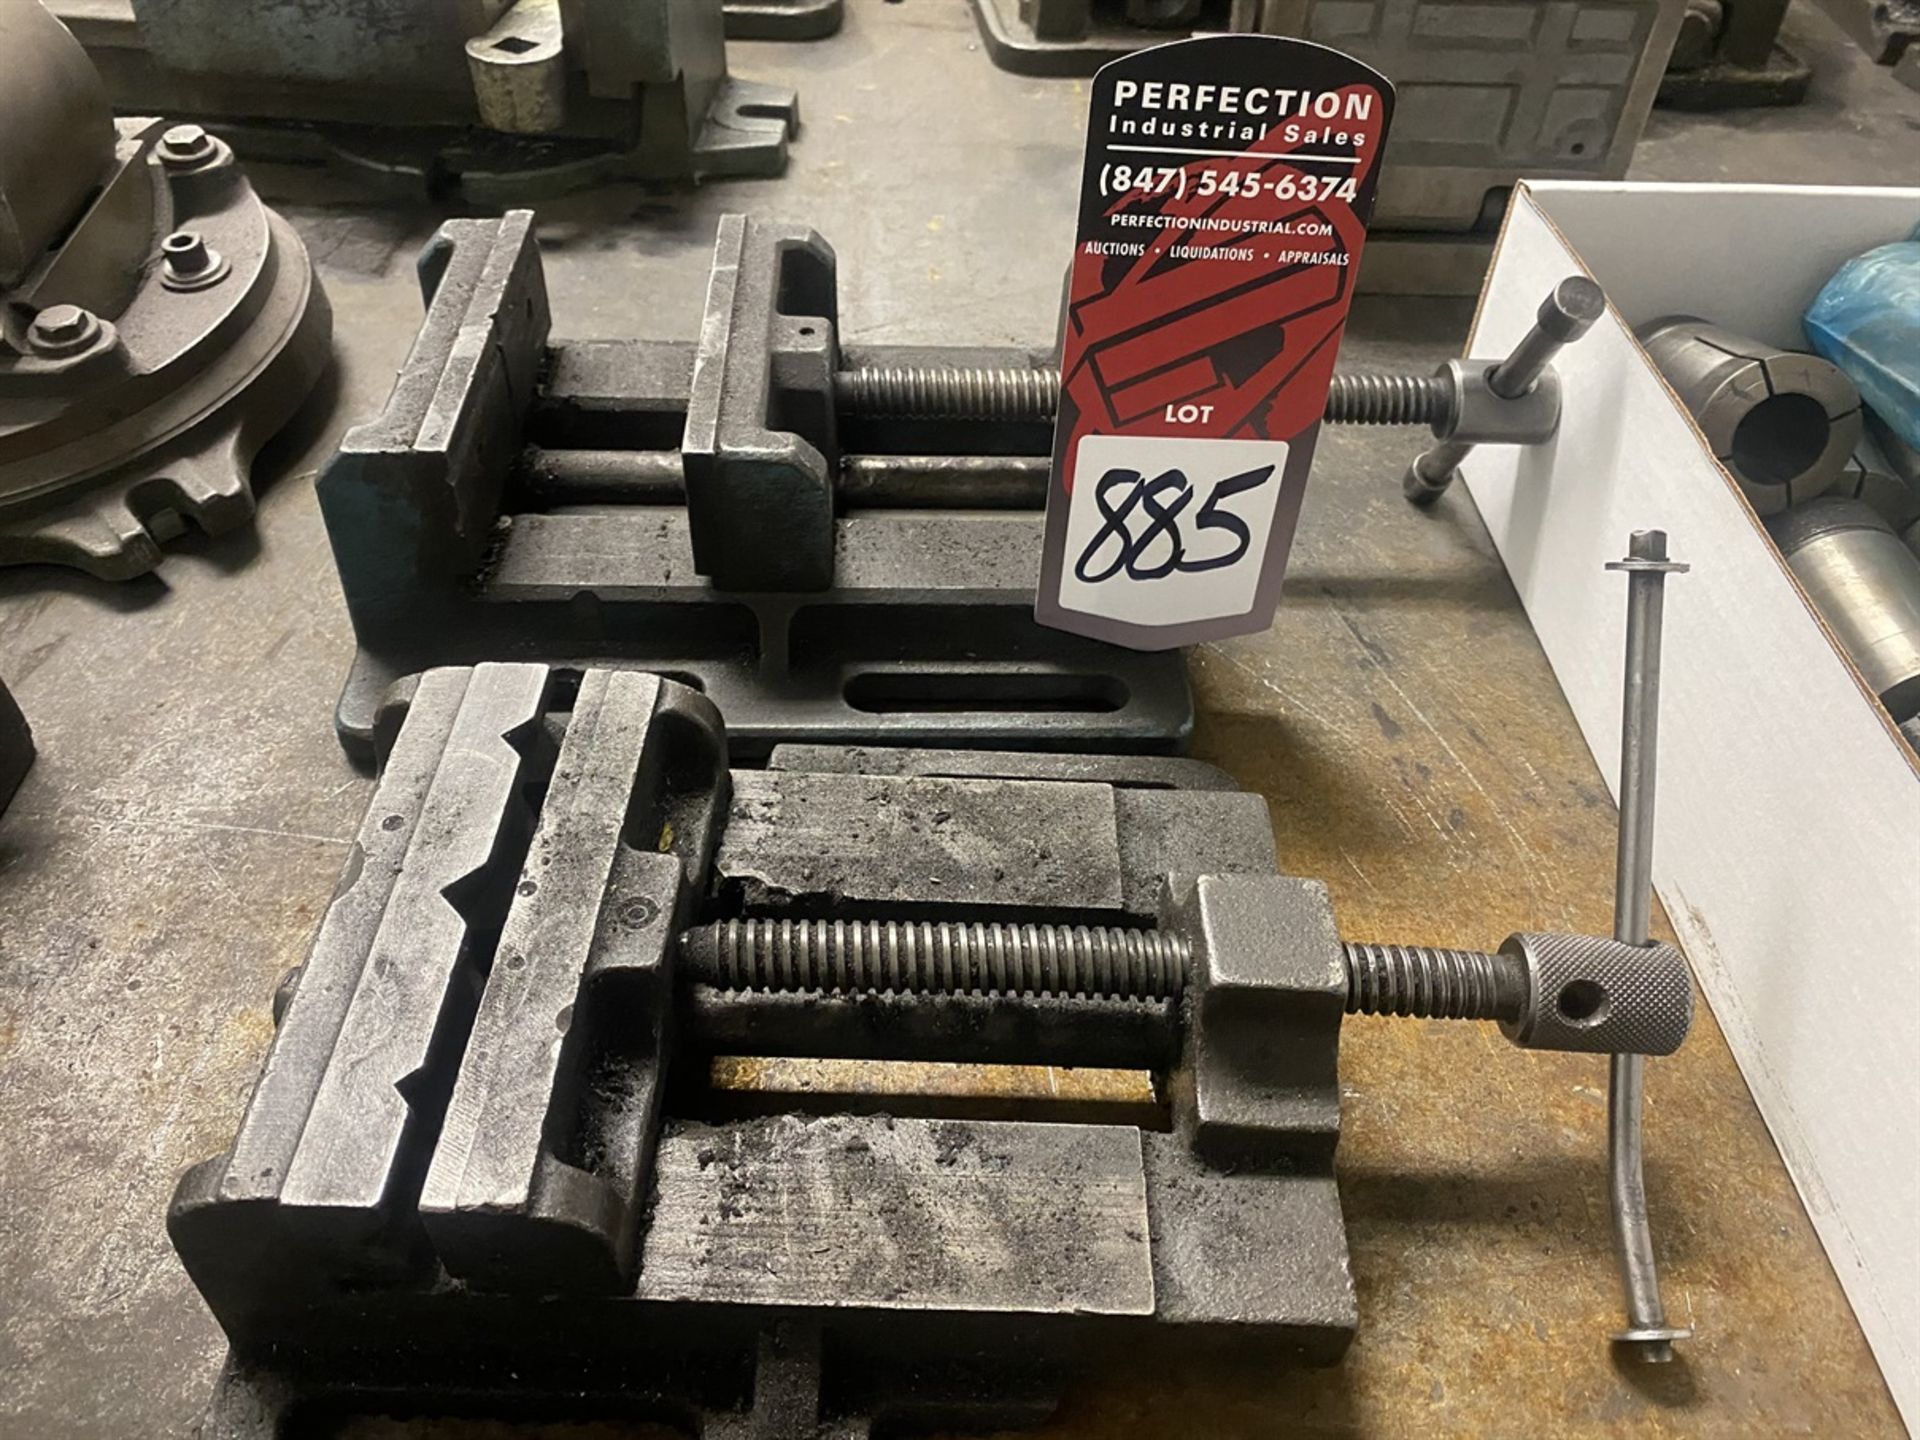 Lot Comprising (1) Palmgren 6" Drill Press Vise and (1) Unknown Make 6" Drill Press Vise - Image 2 of 2